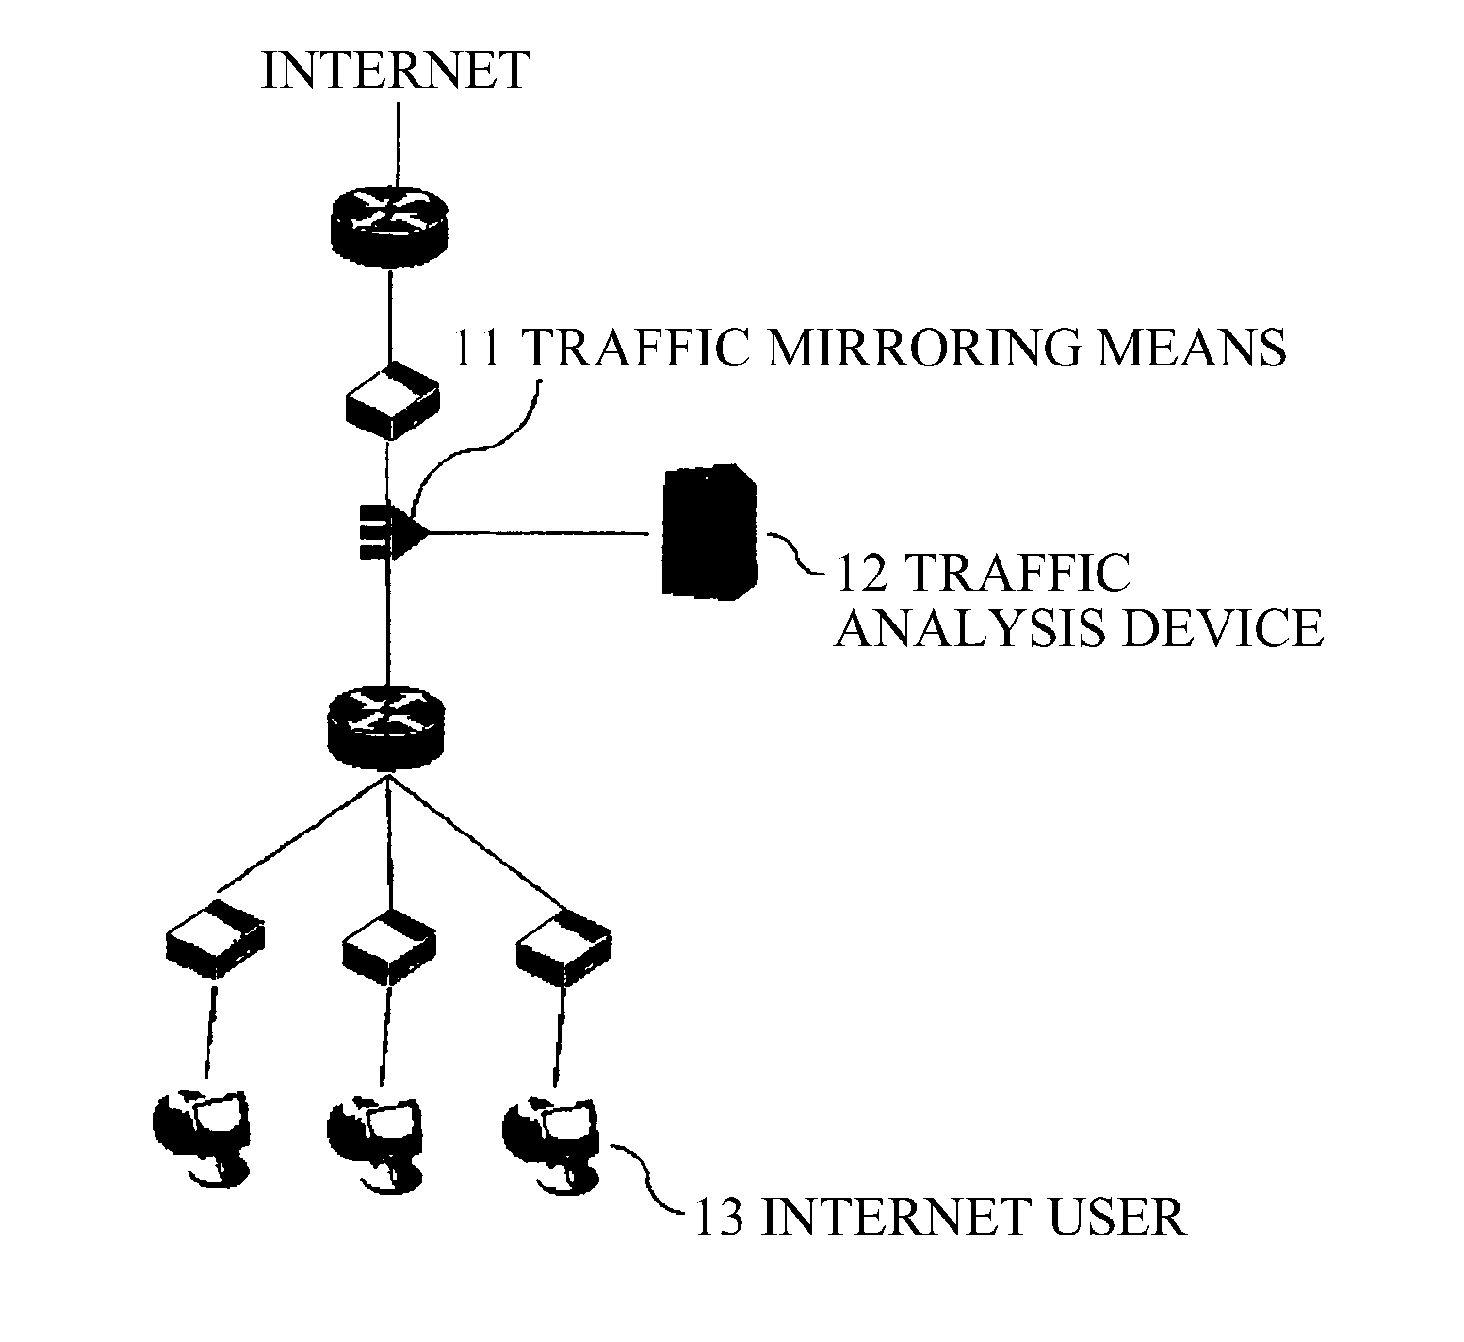 Session-based traffic analysis system